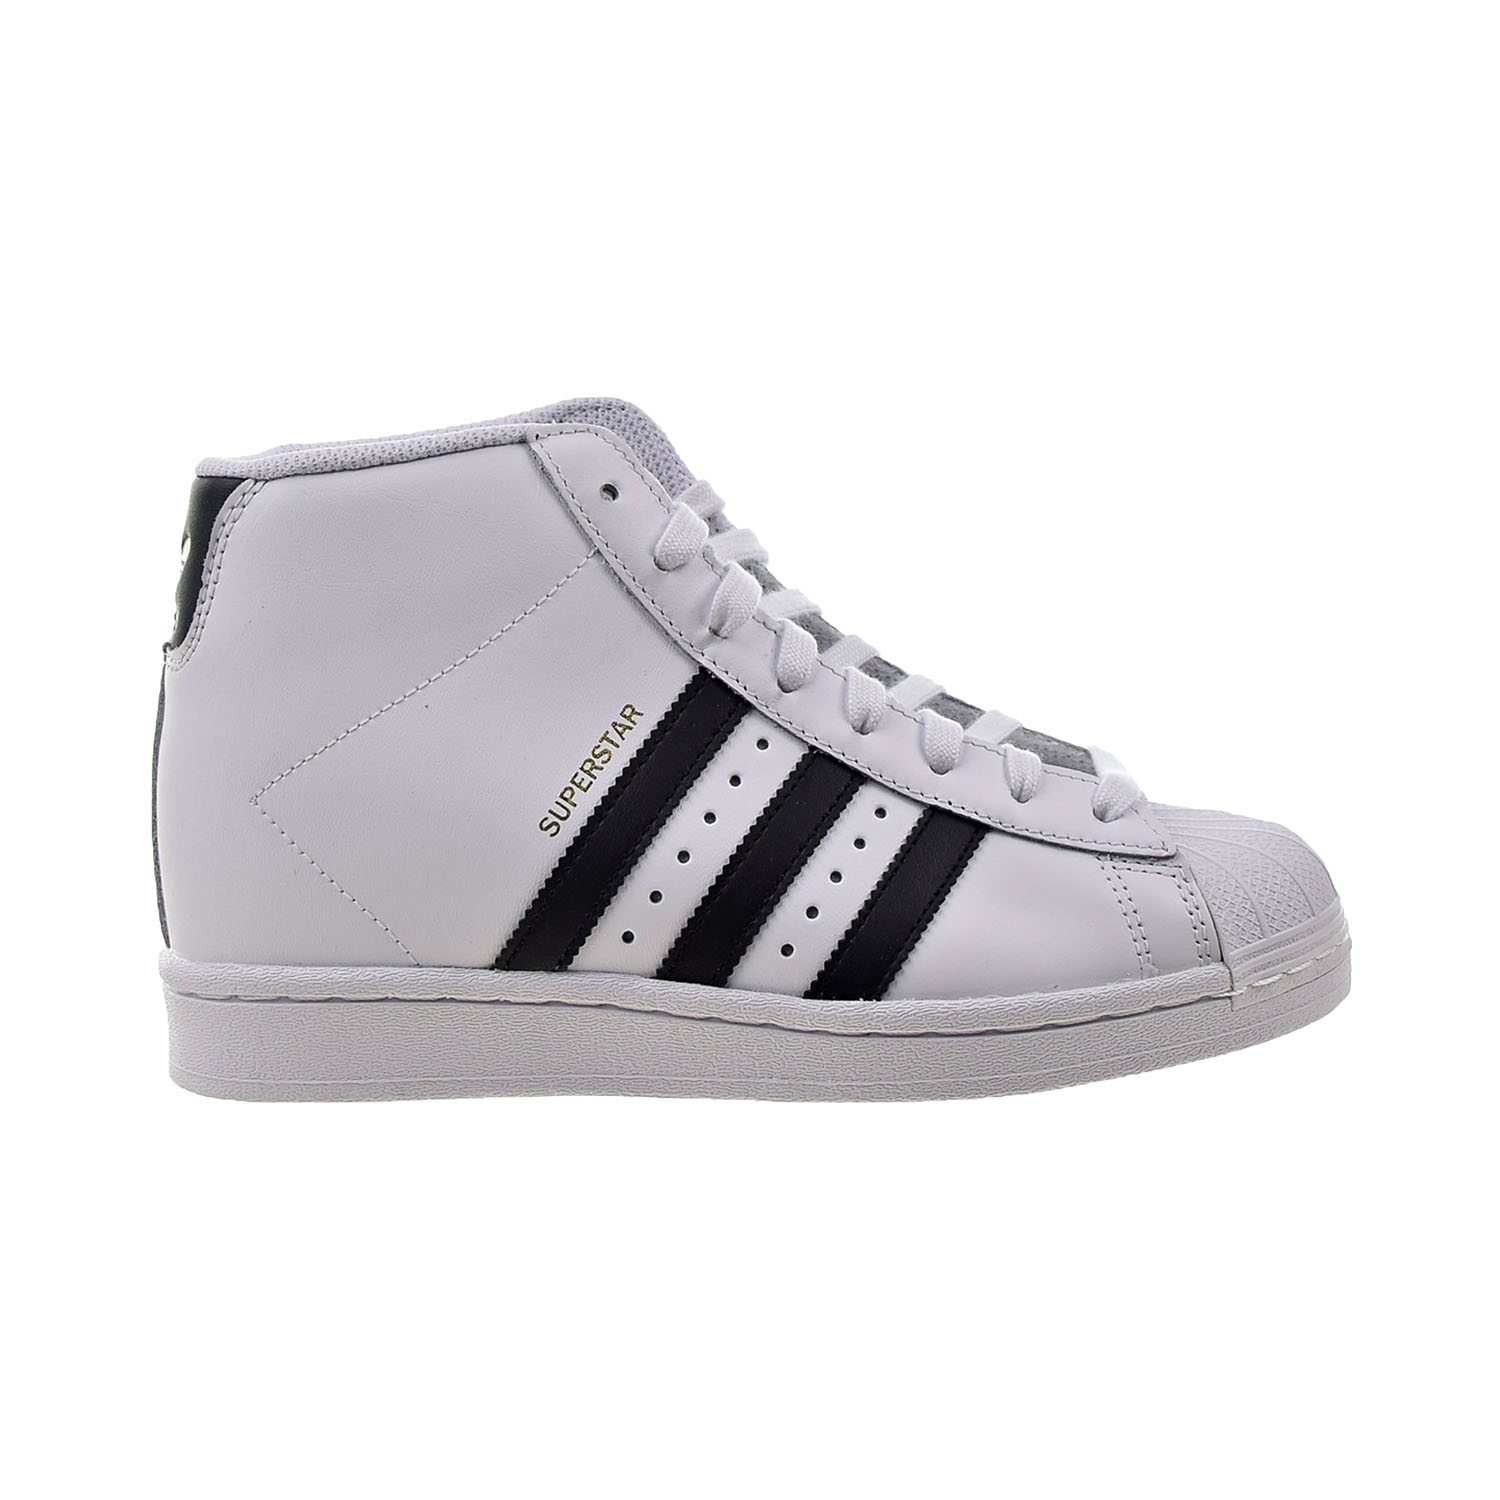 service Living room More Adidas Superstar Up Wedge Women's Shoes Cloud White-Core Black fw0118